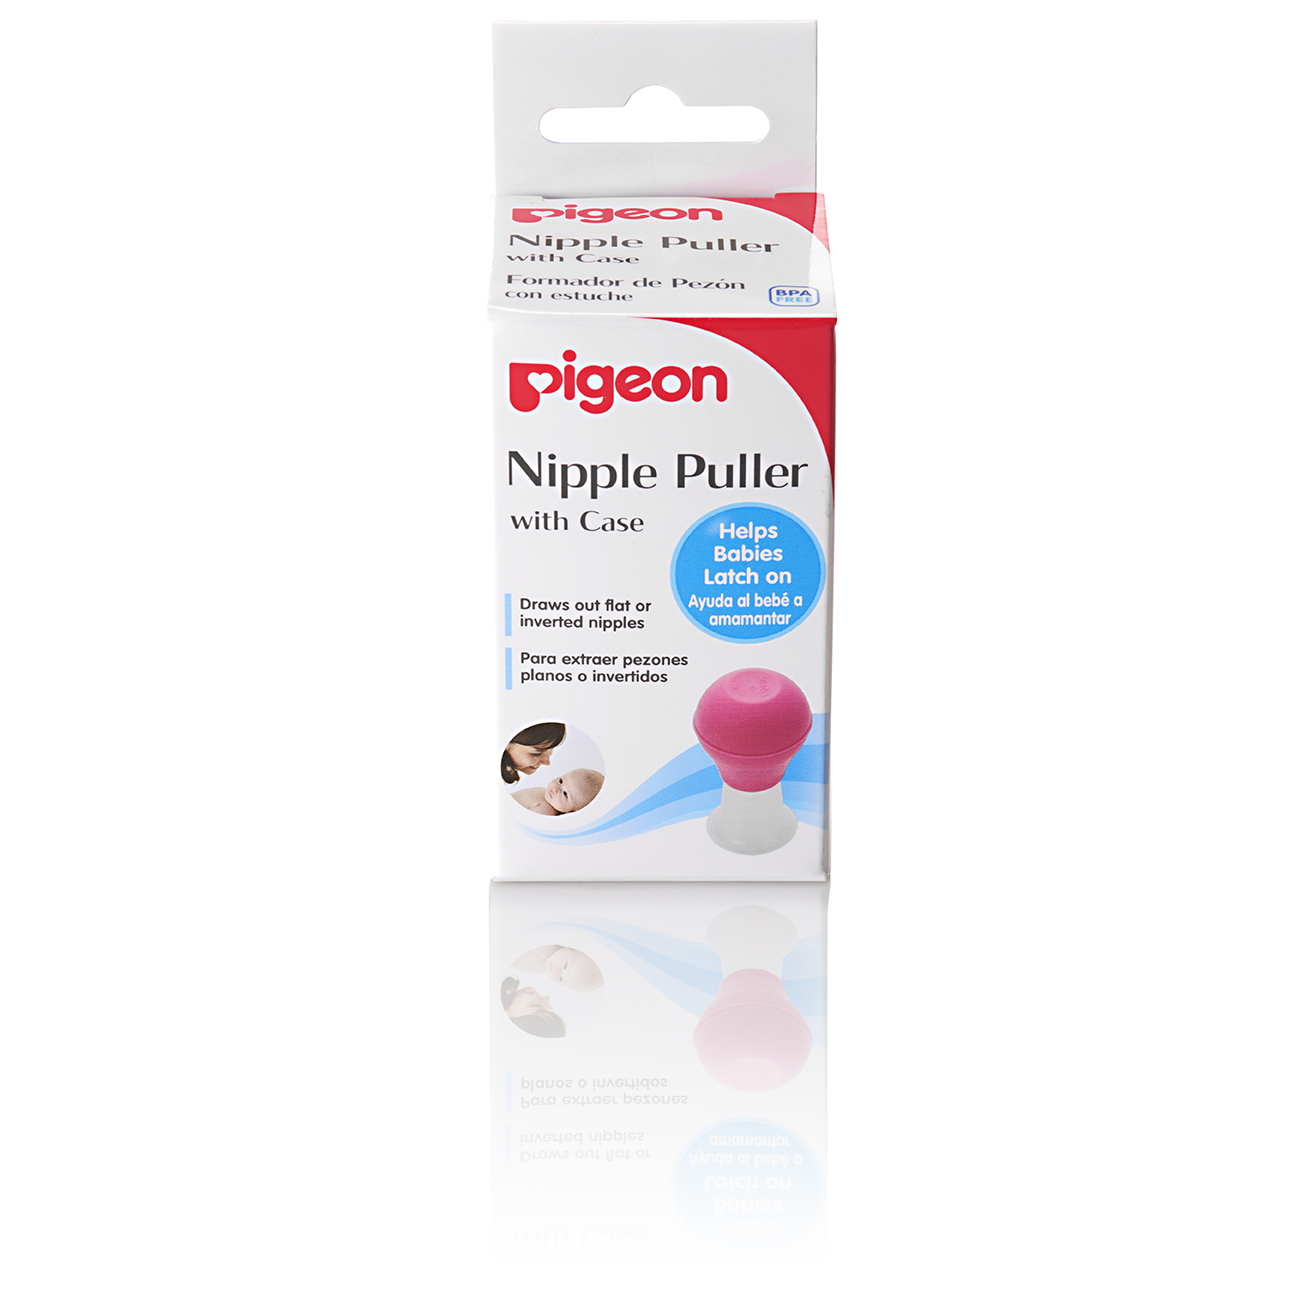 Pigeon Nipple Puller With Case (PG-79369)